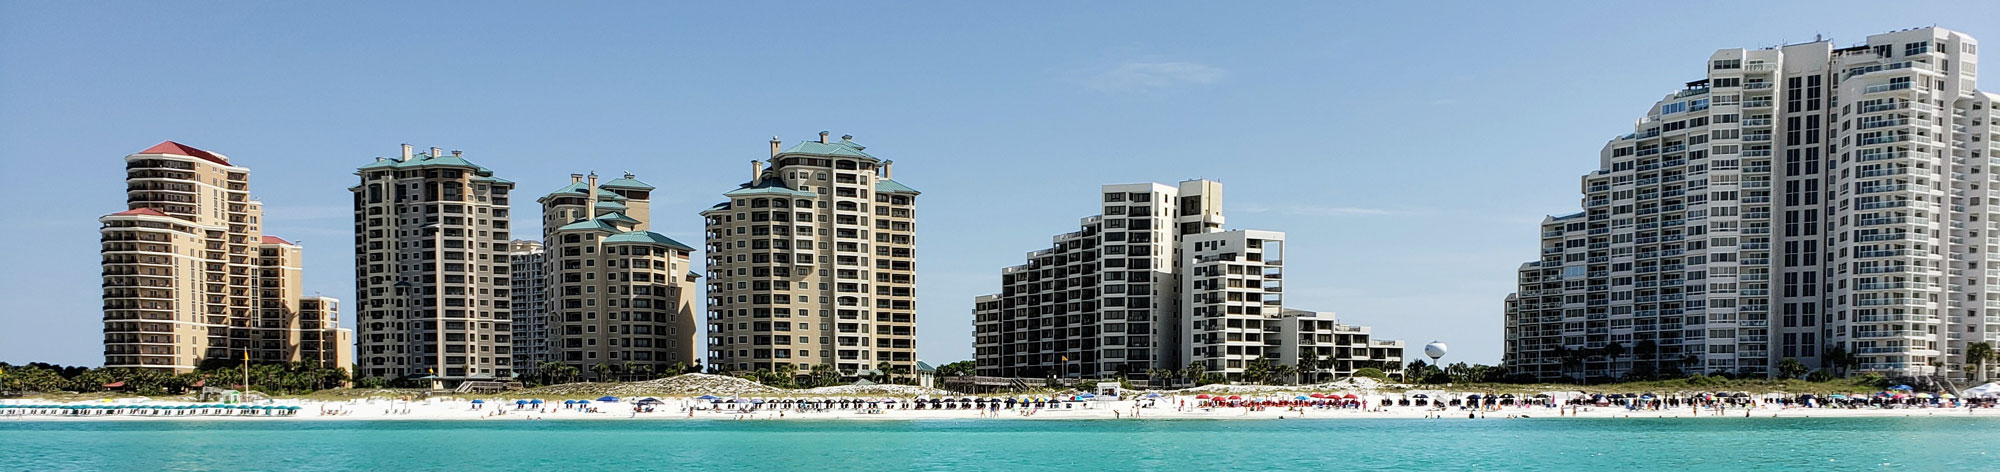 A view of 6 multi-story resorts along side the beach